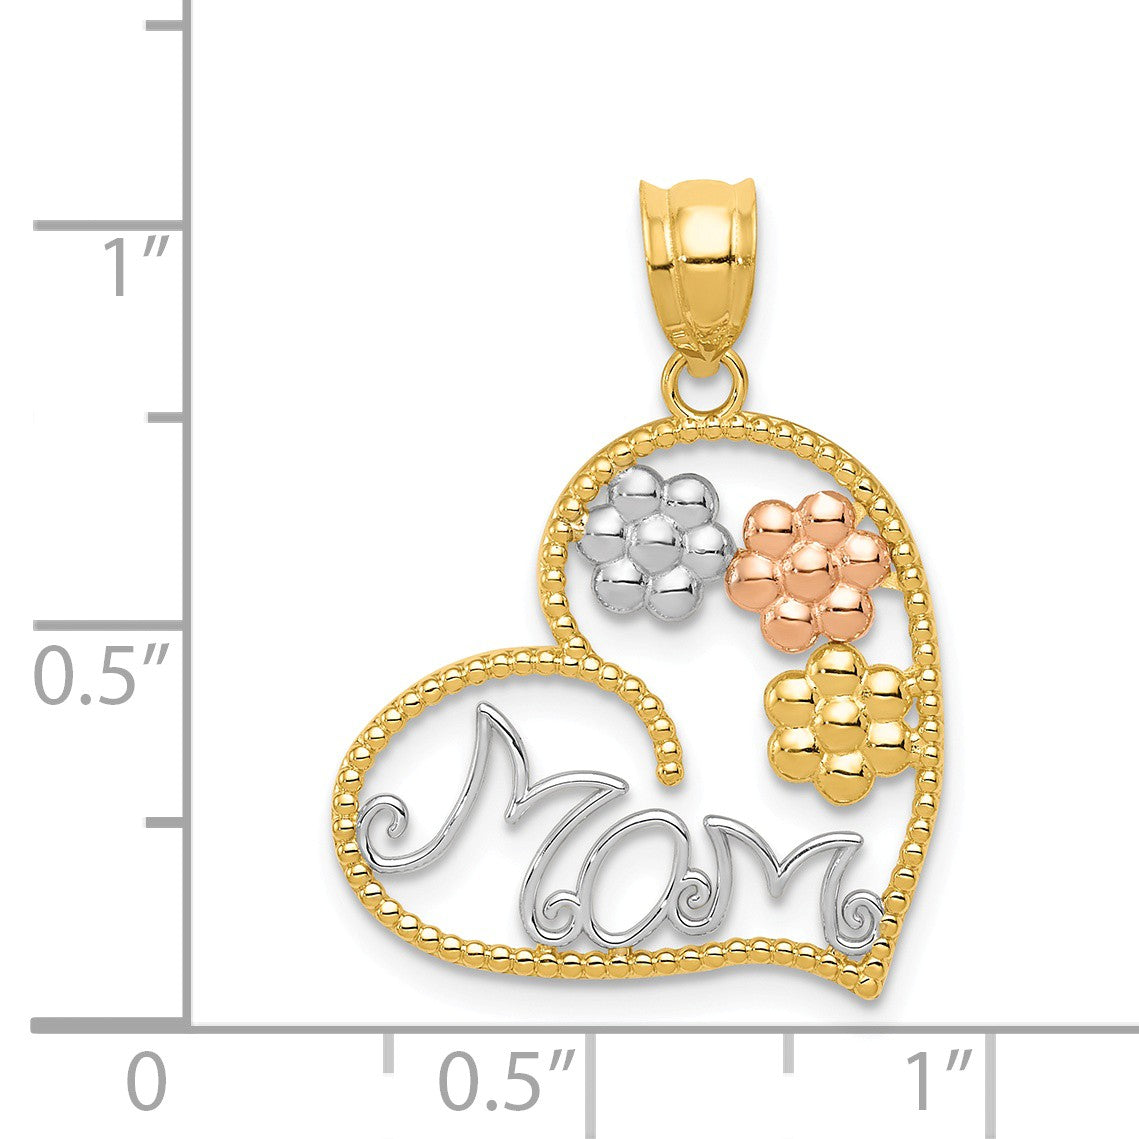 Alternate view of the 14k Tri Color Gold MOM and Flowers Pendant, 20mm by The Black Bow Jewelry Co.